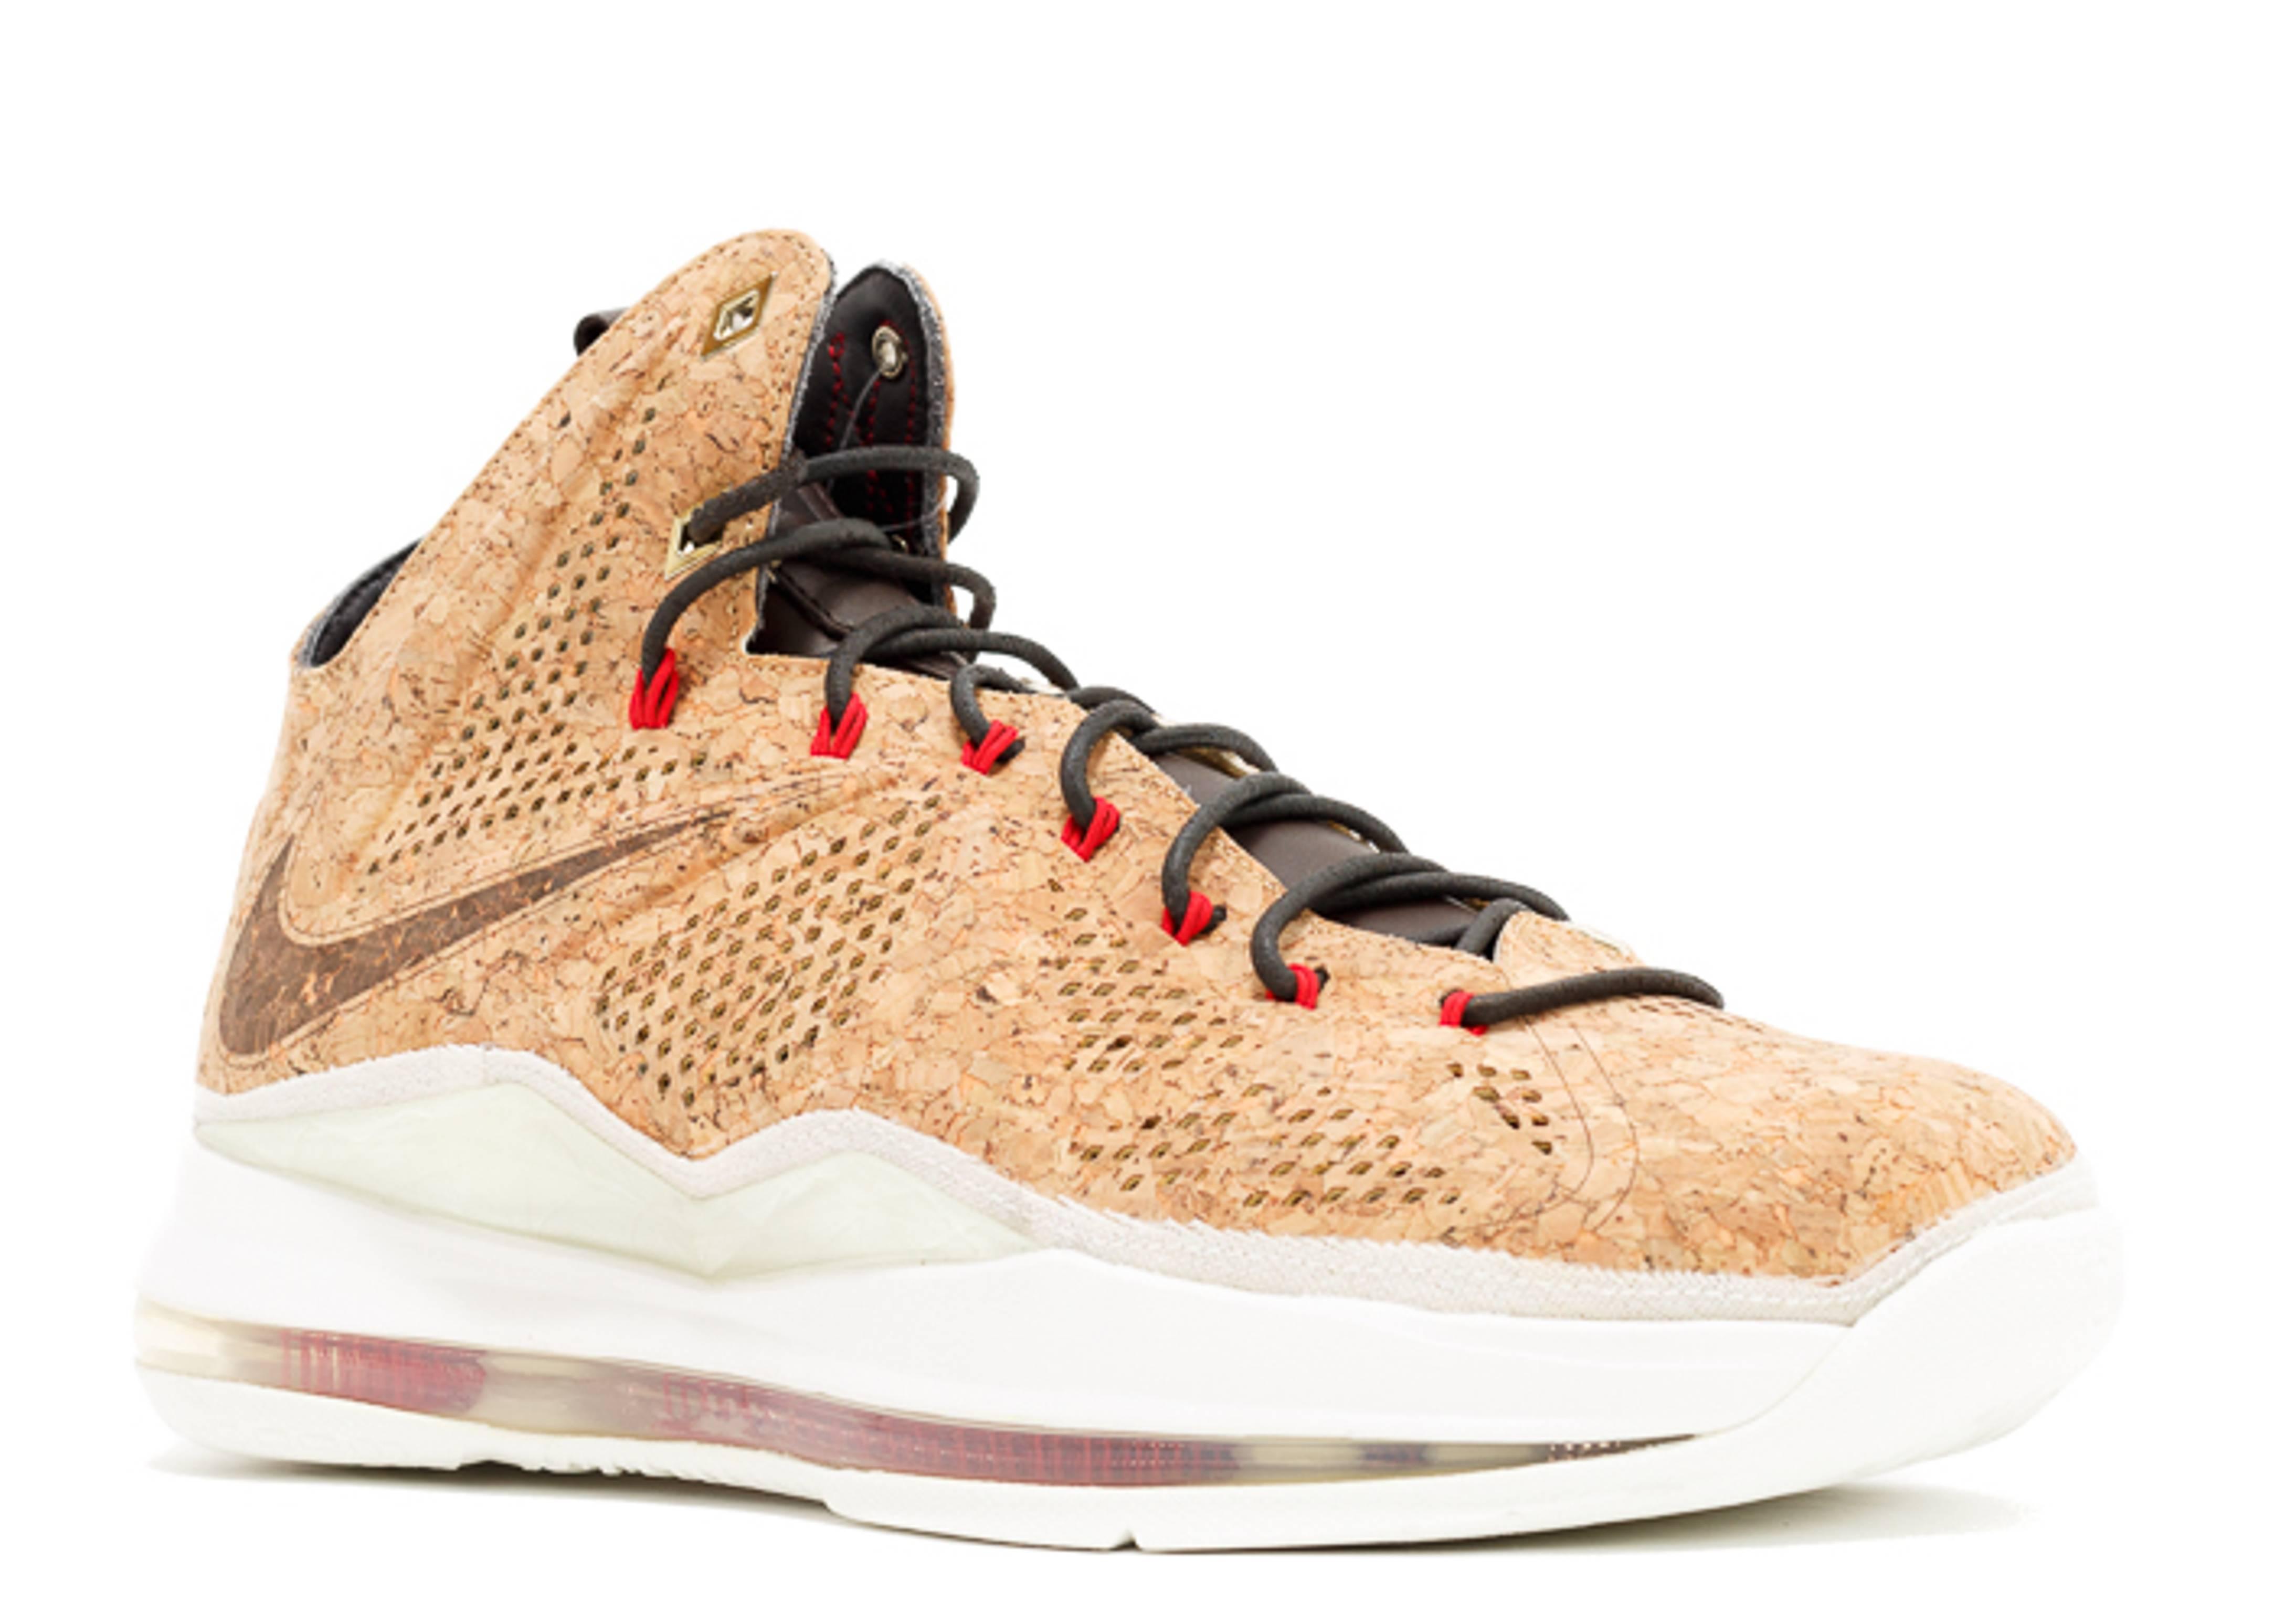 Nike Lebron 10 Ext Qs 'cork' Shoes - Size 9.5 in Brown for Men - Save ...